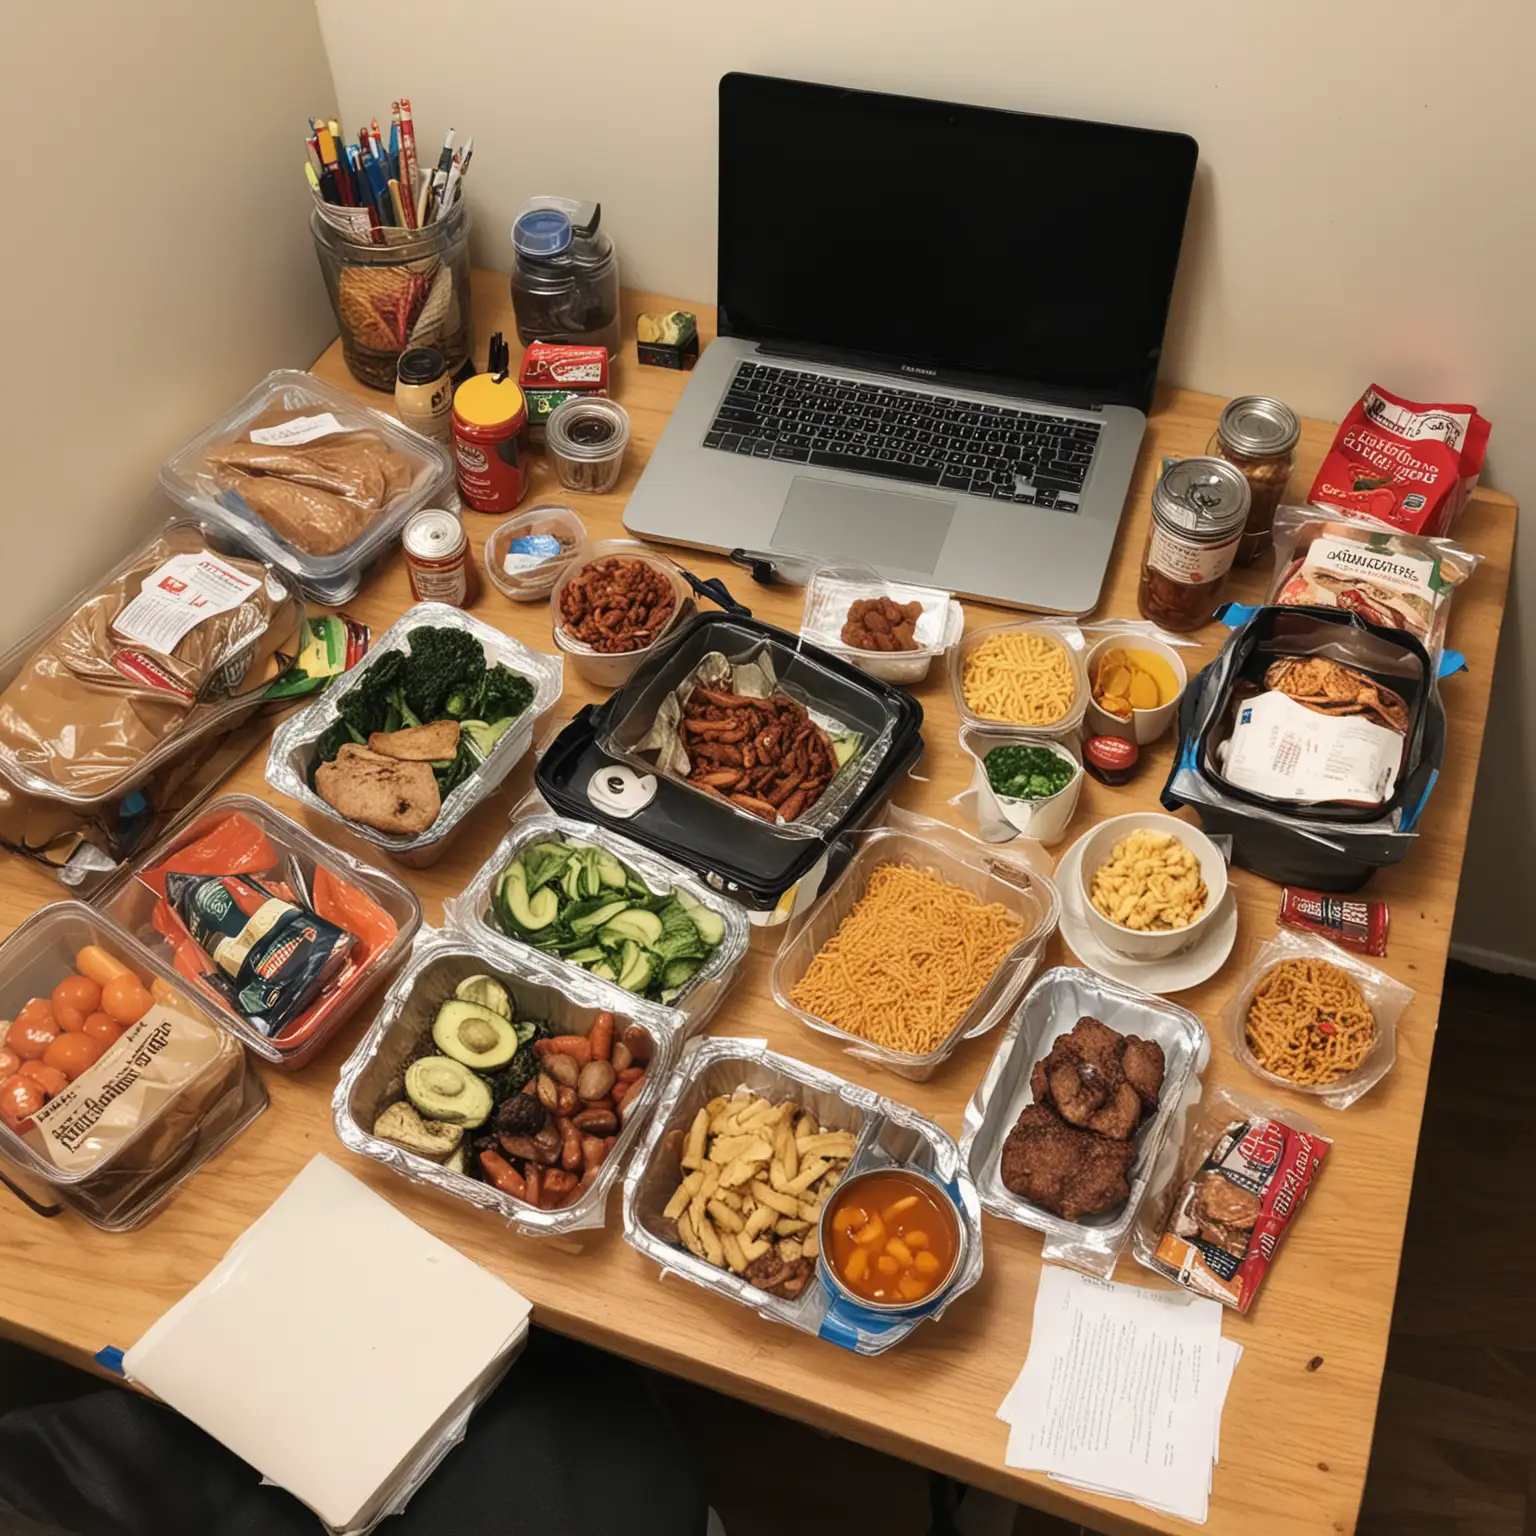 Study Desk Packed with HomeCooked and TakeOut Food